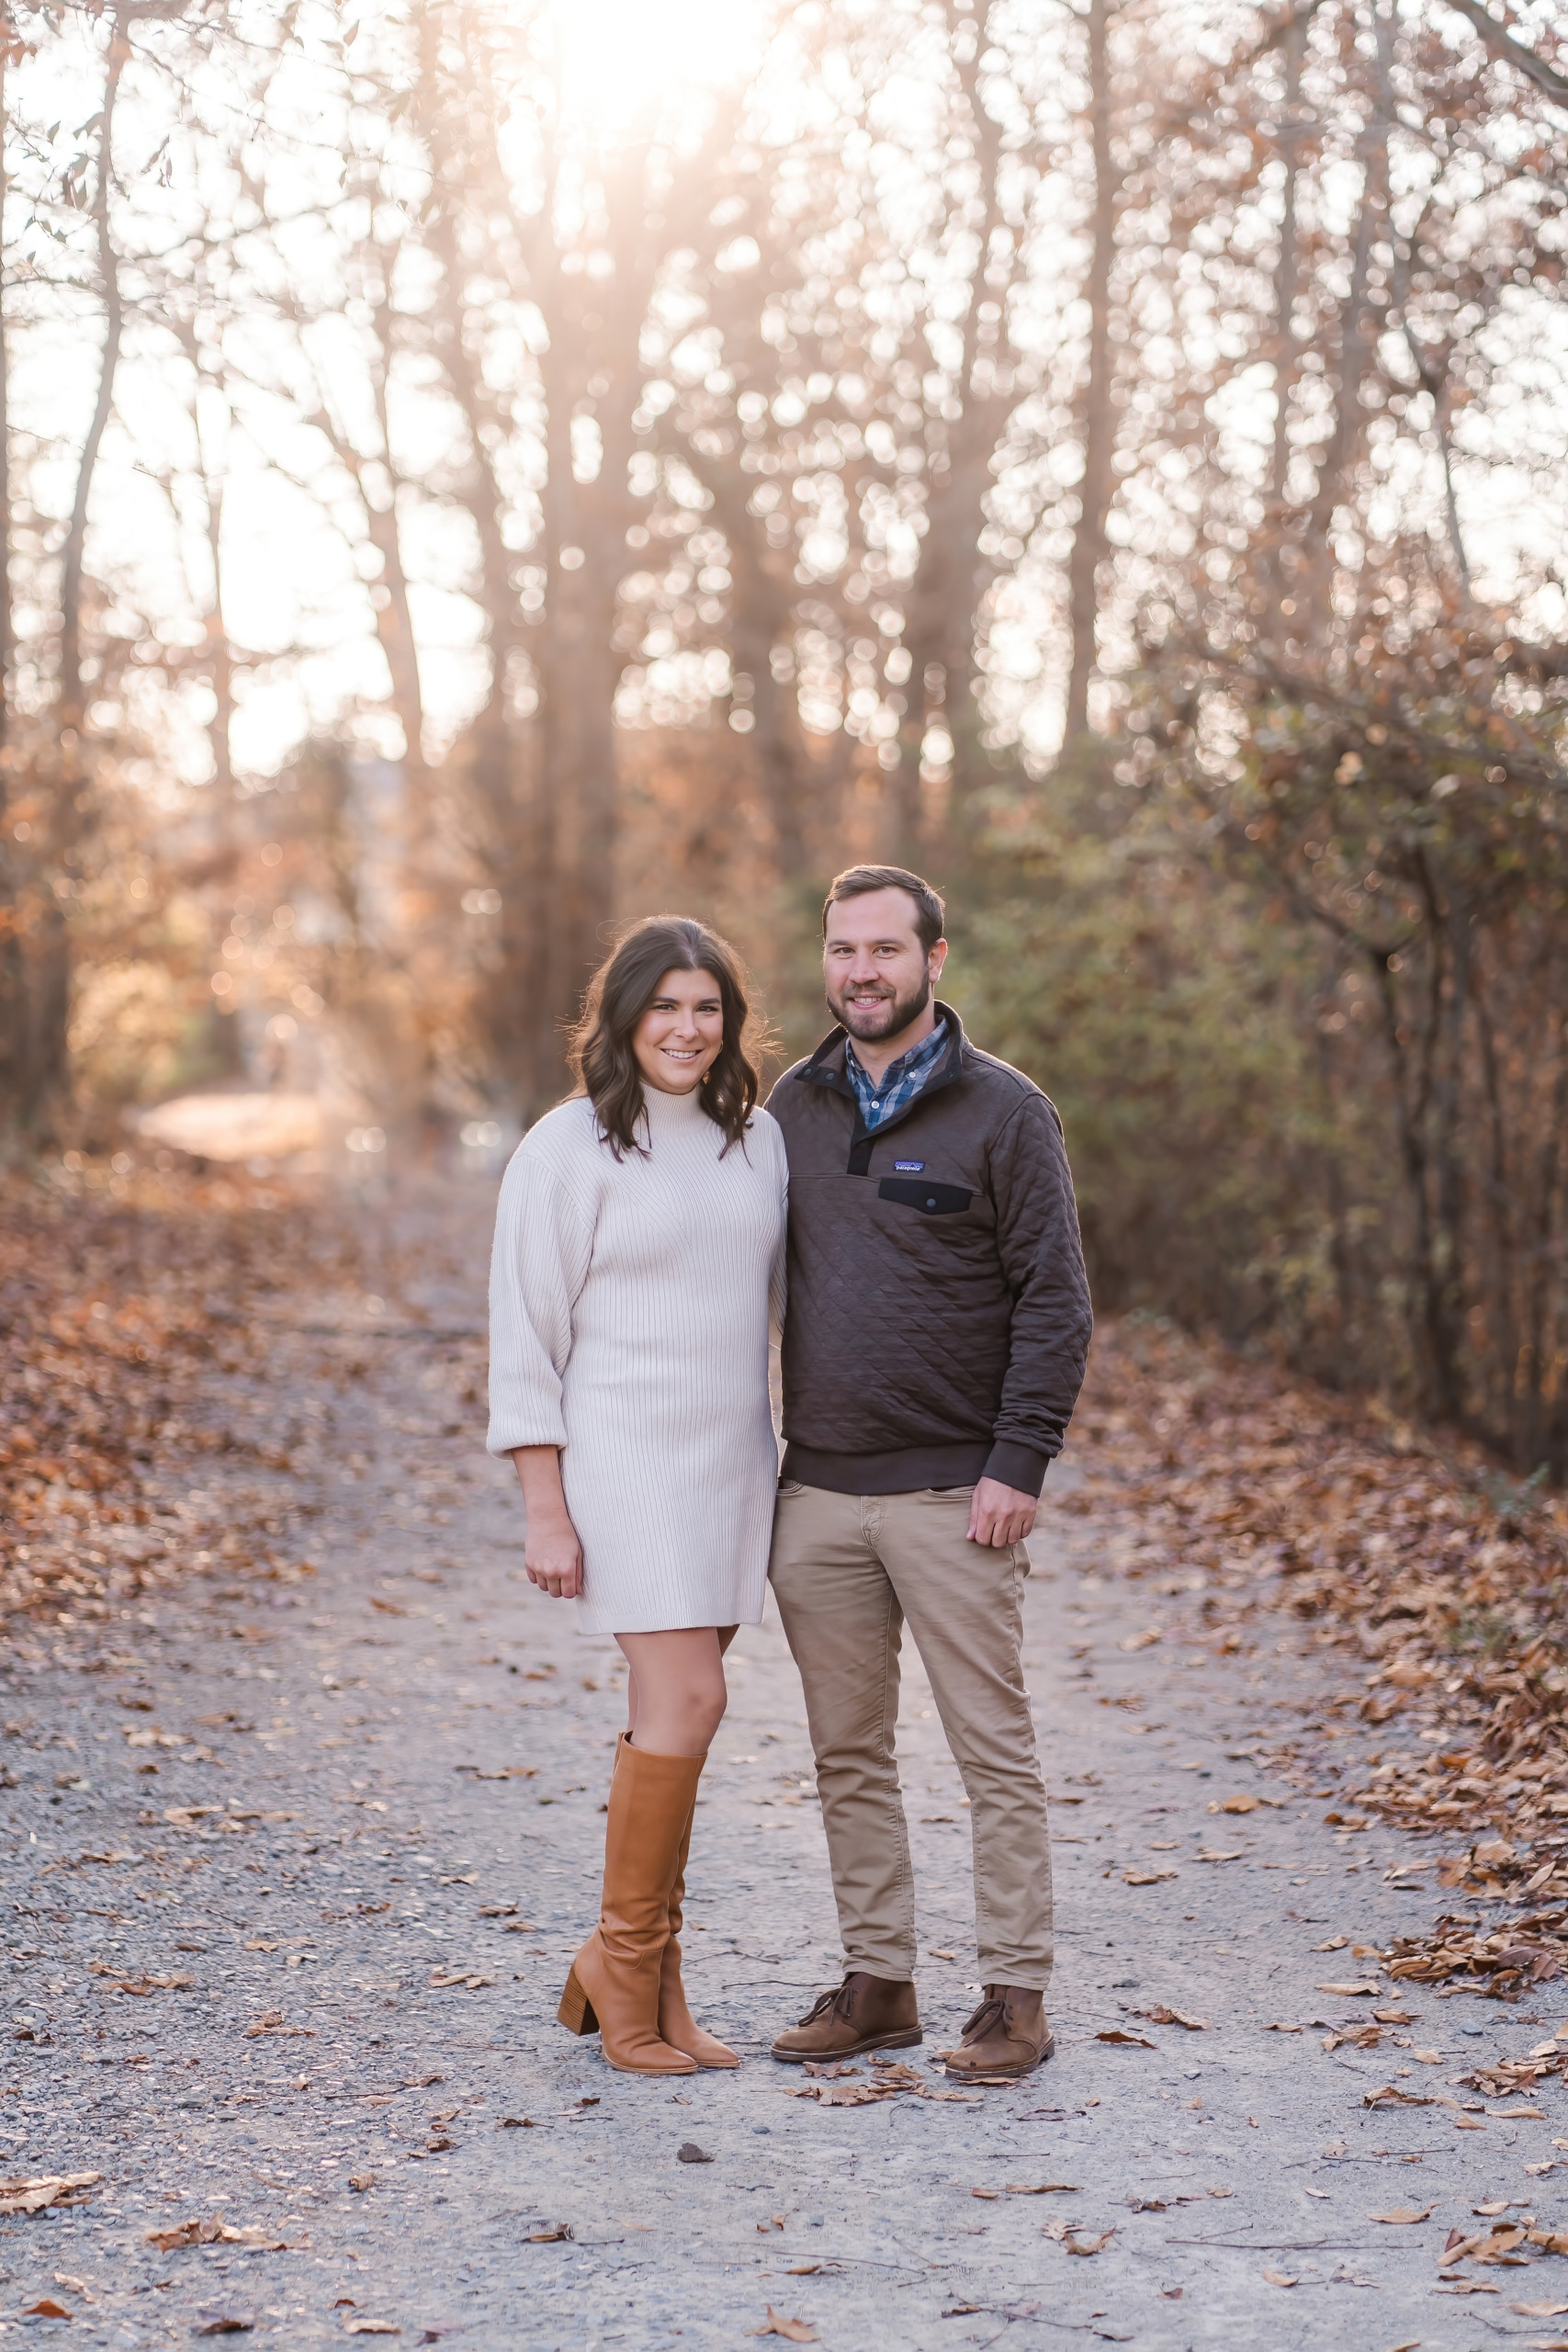 Greenway Farms Engaged Couple